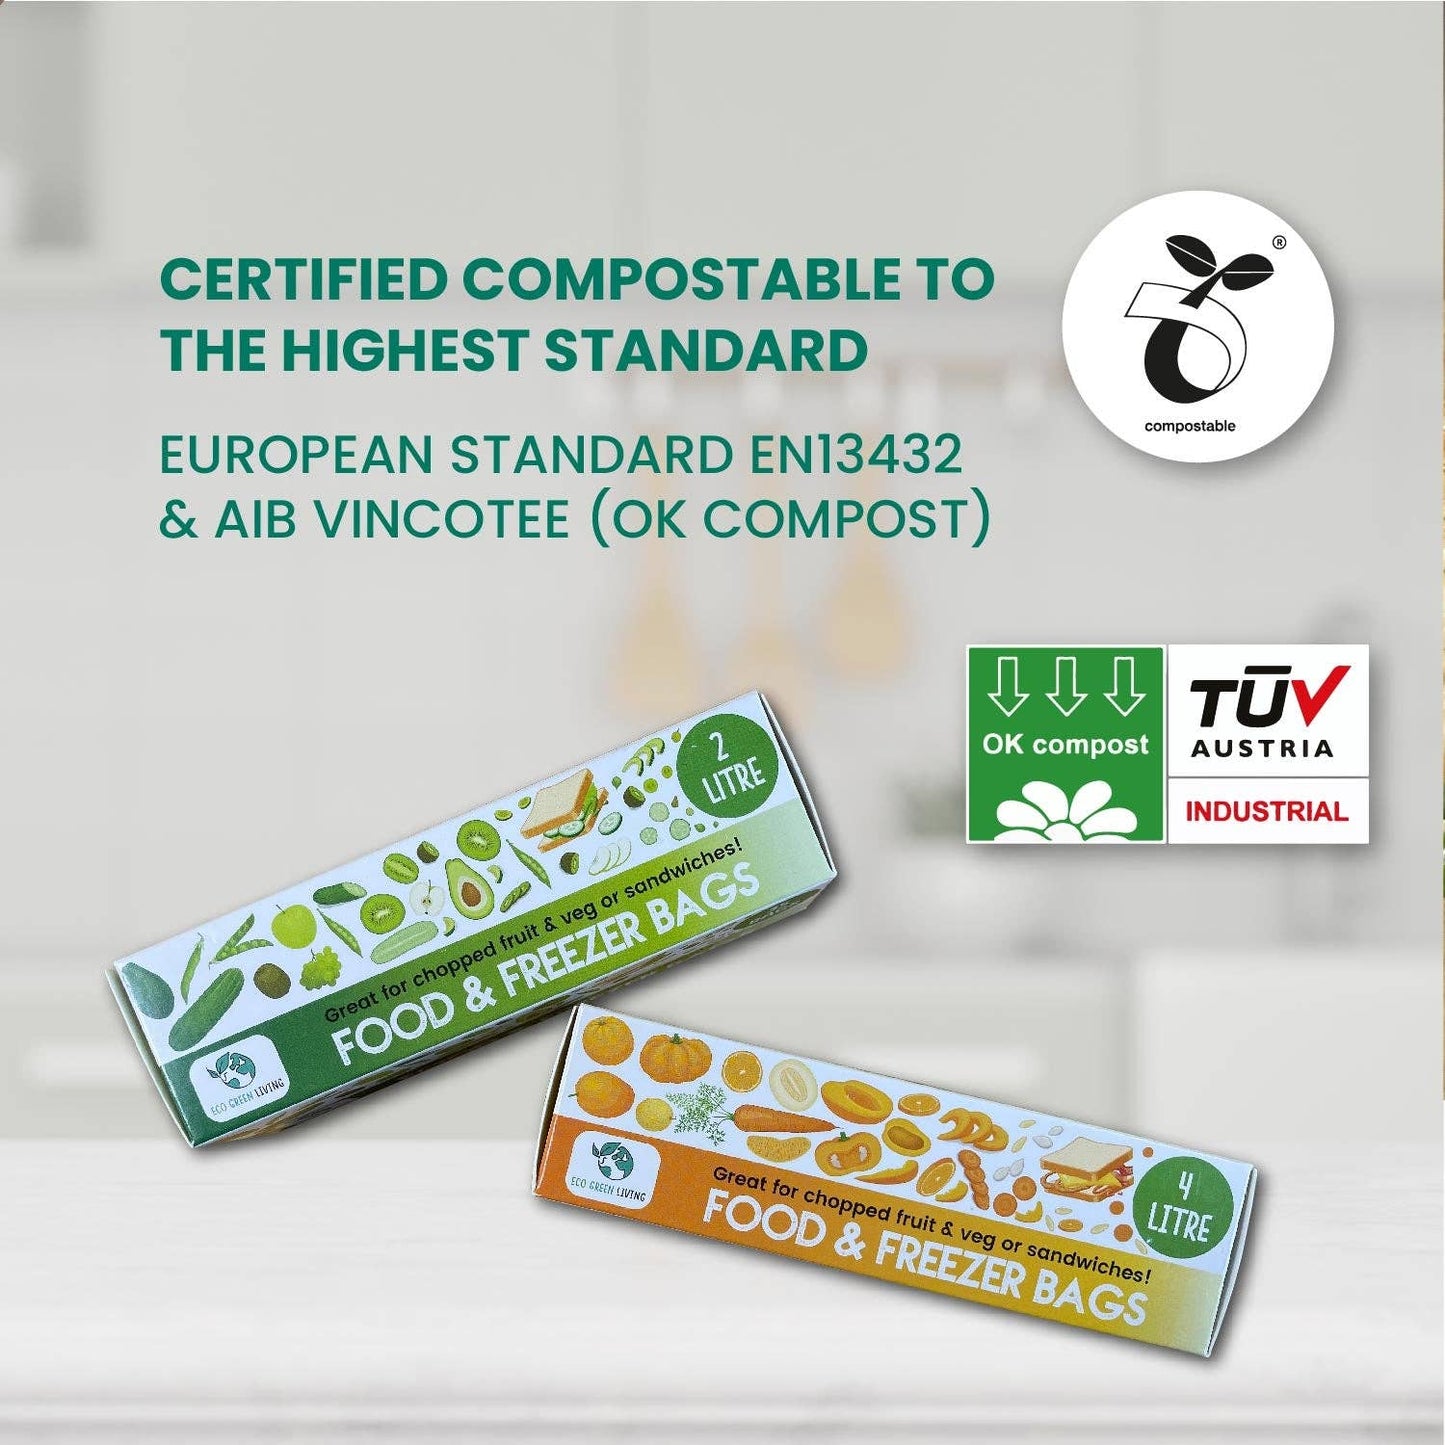 2 Litre Certified Compostable Food & Freezer Bags (35 bags)